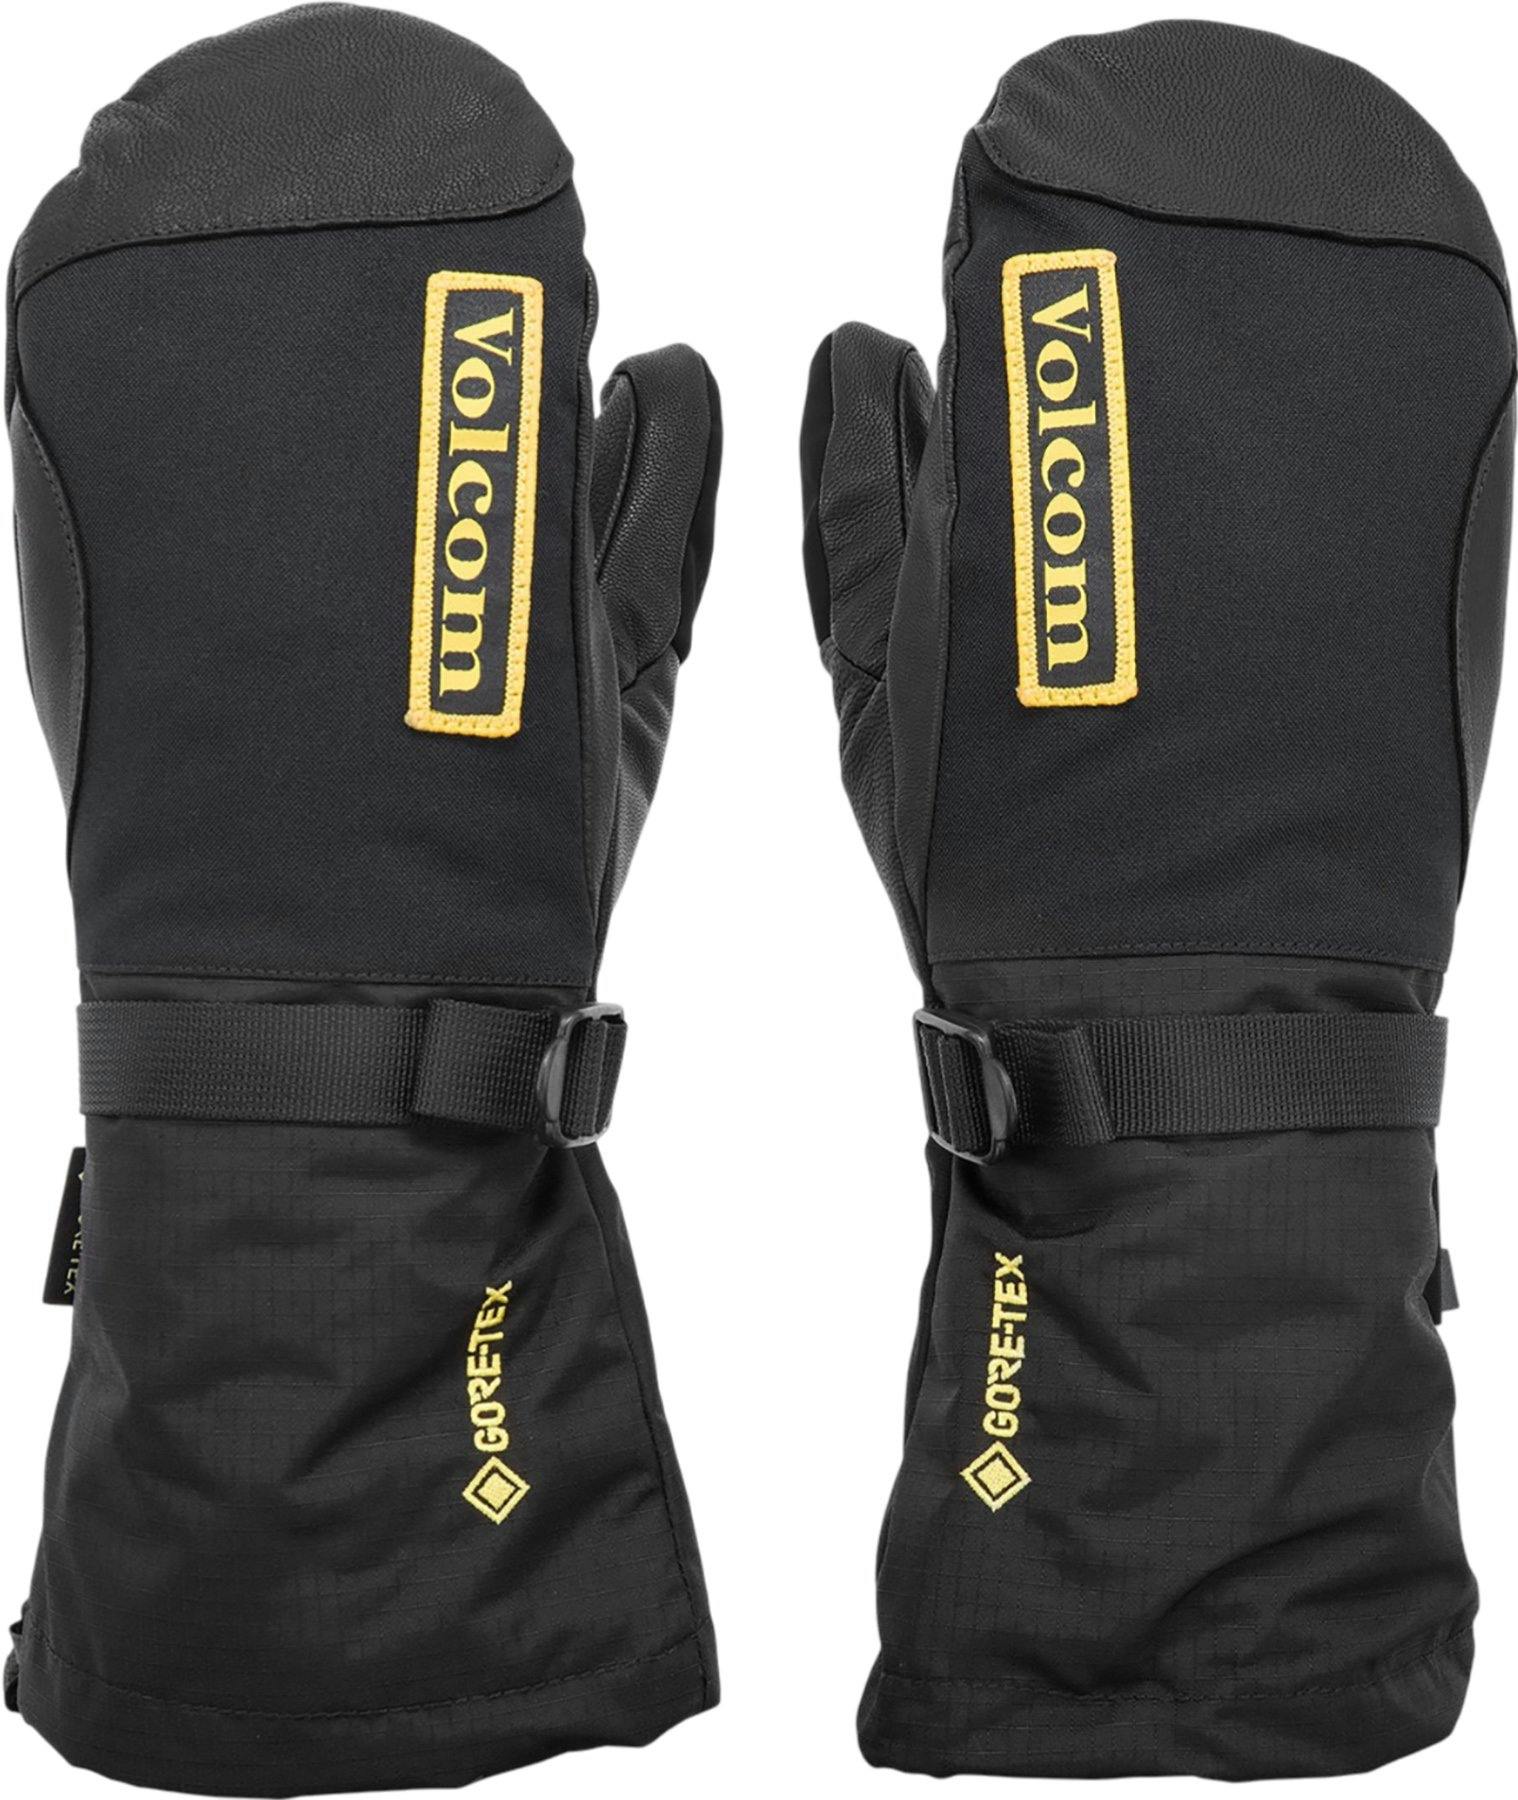 Product image for 91 GORE-TEX Mittens - Men's